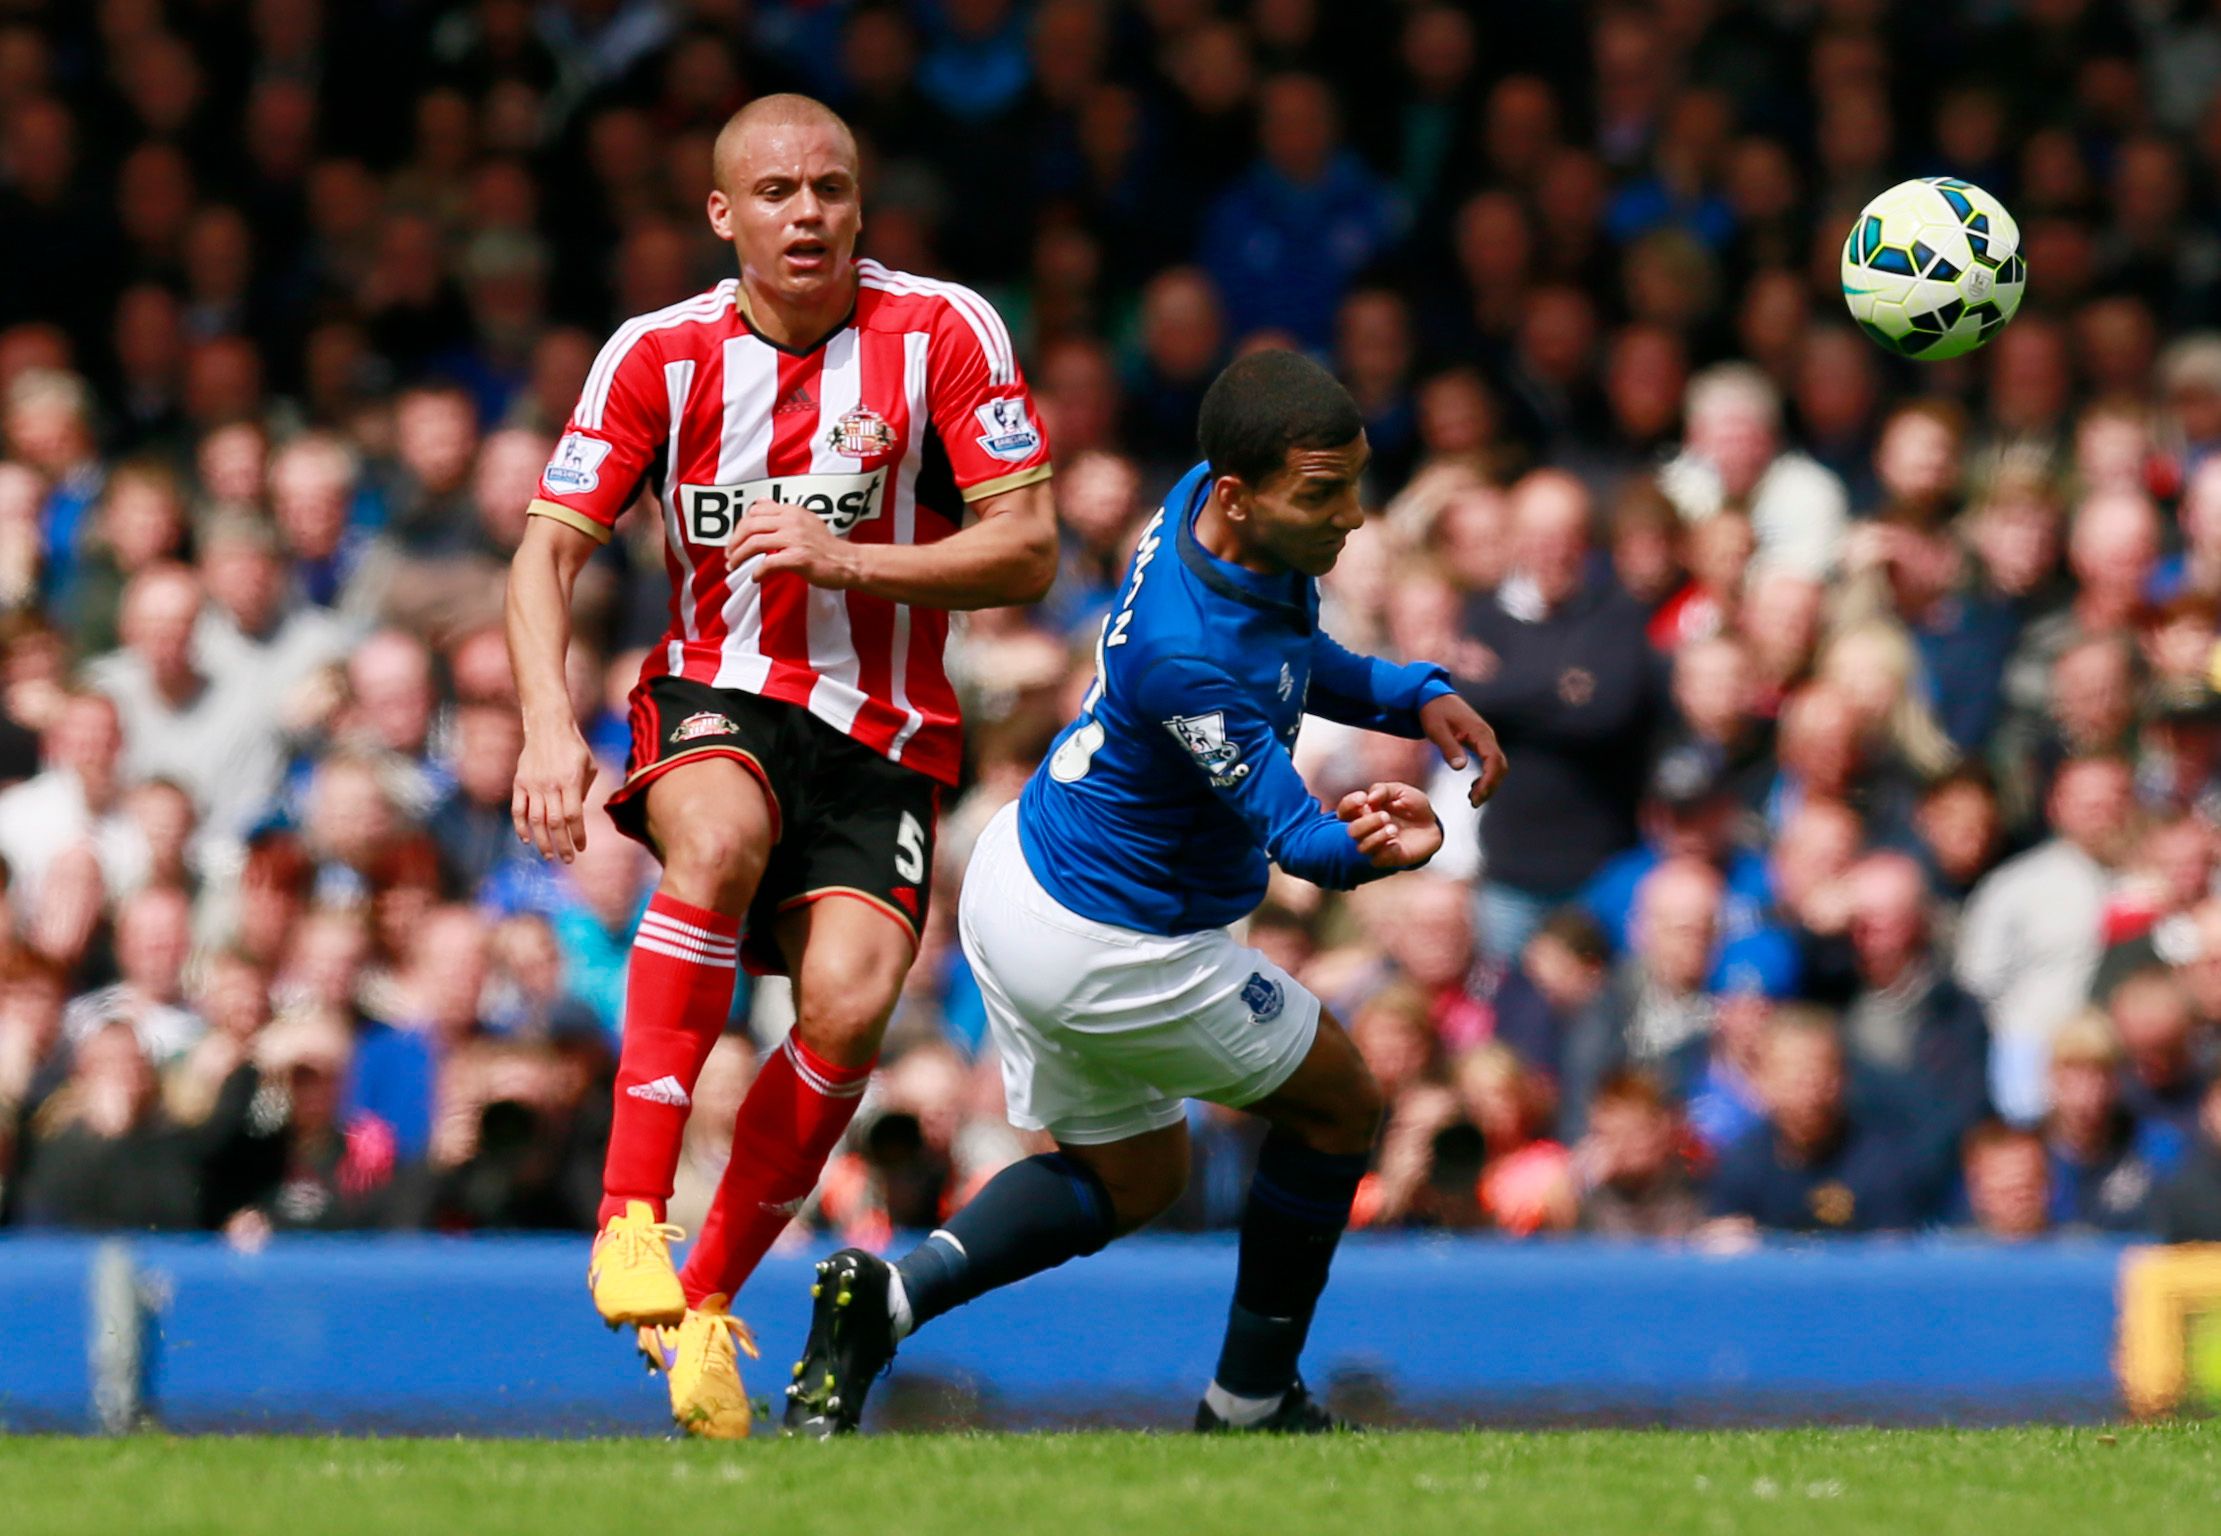 Football - Everton v Sunderland - Barclays Premier League - Goodison Park - 9/5/15
Everton's Aaron Lennon in action with Sunderland's Wes Brown
Action Images via Reuters / Jason Cairnduff
Livepic
EDITORIAL USE ONLY. No use with unauthorized audio, video, data, fixture lists, club/league logos or 